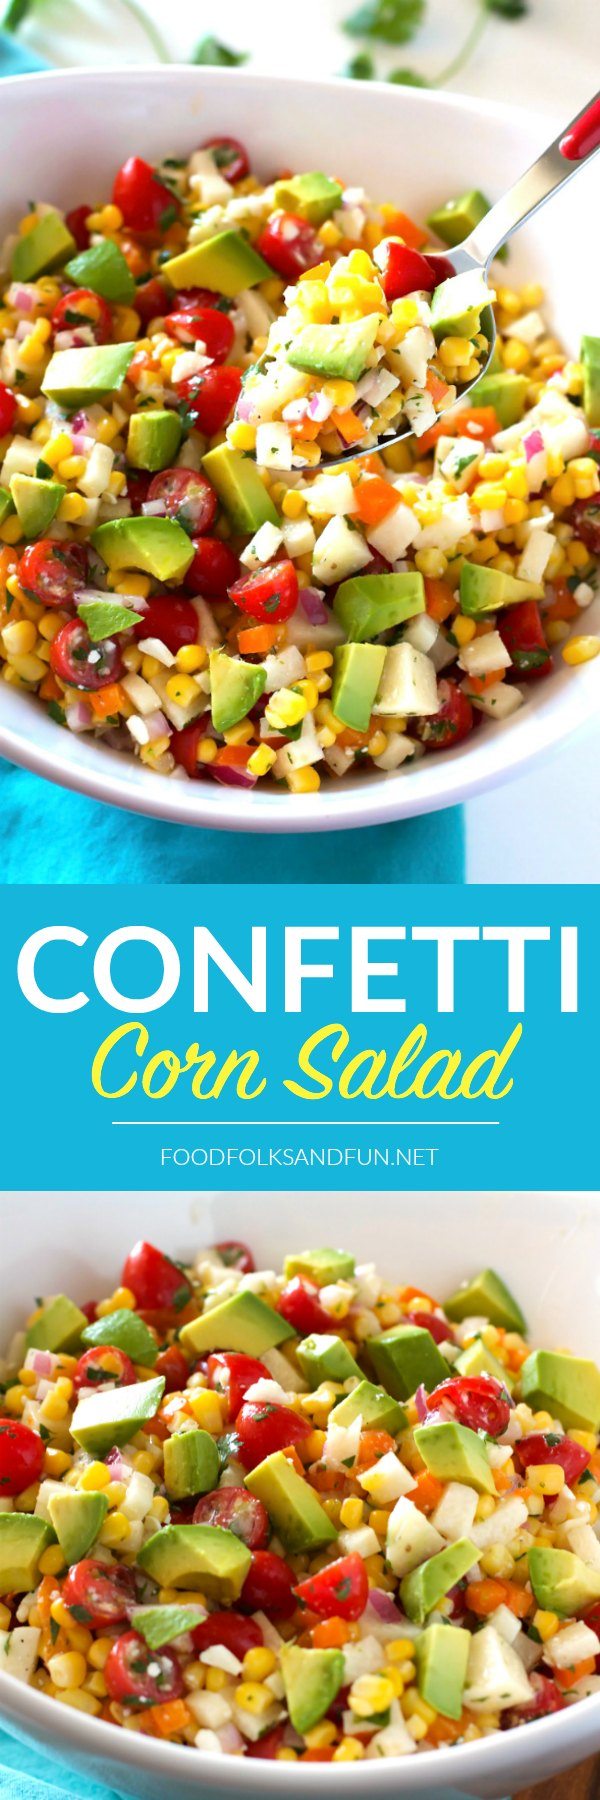 This Confetti Corn Salad is a refreshing, light side dish that’s perfect for summer dinners, potlucks, parties, and more!